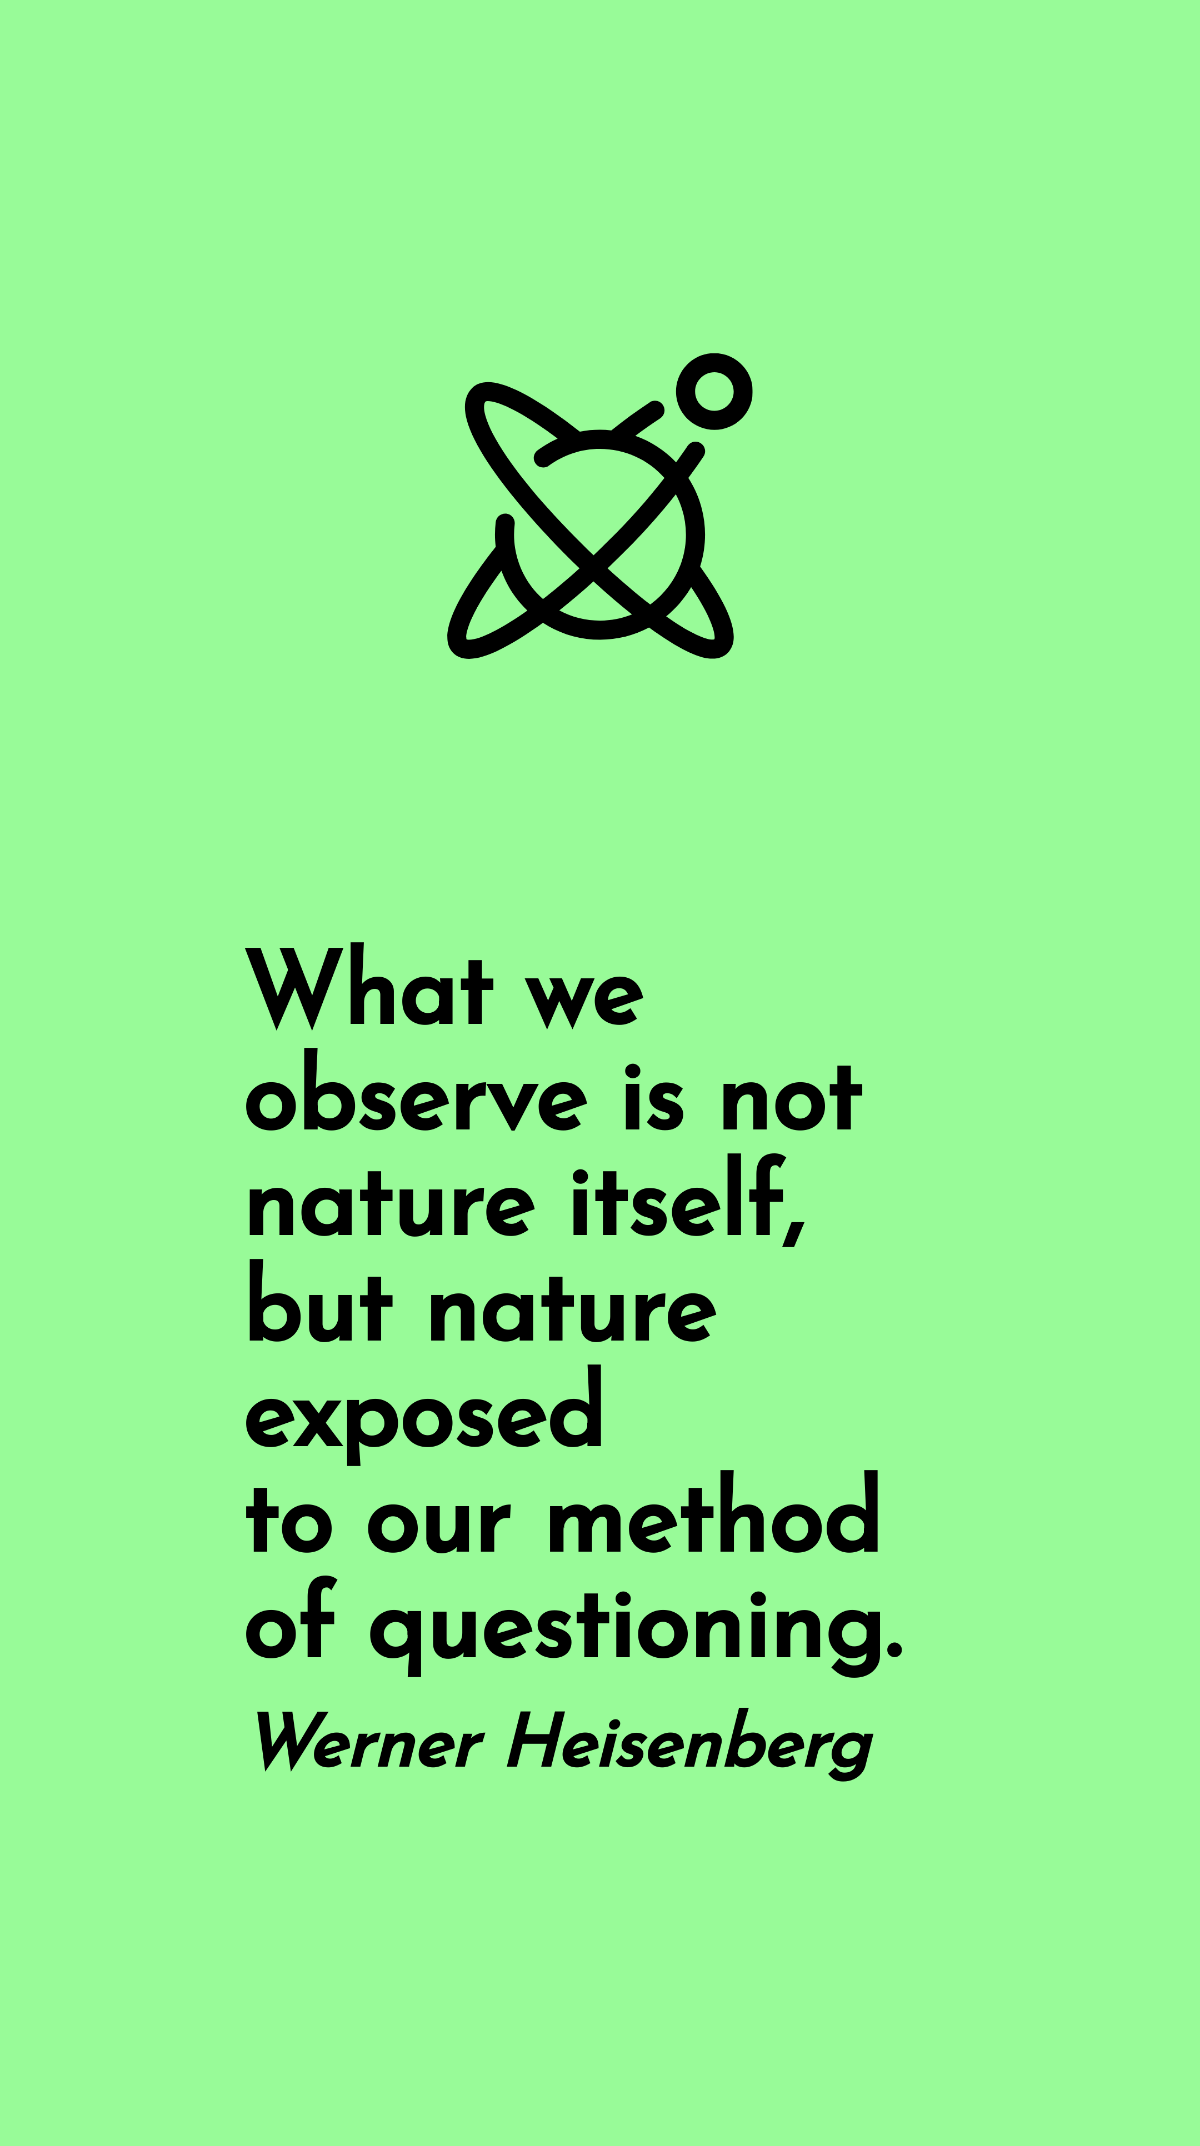 Werner Heisenberg - What we observe is not nature itself, but nature exposed to our method of questioning. Template